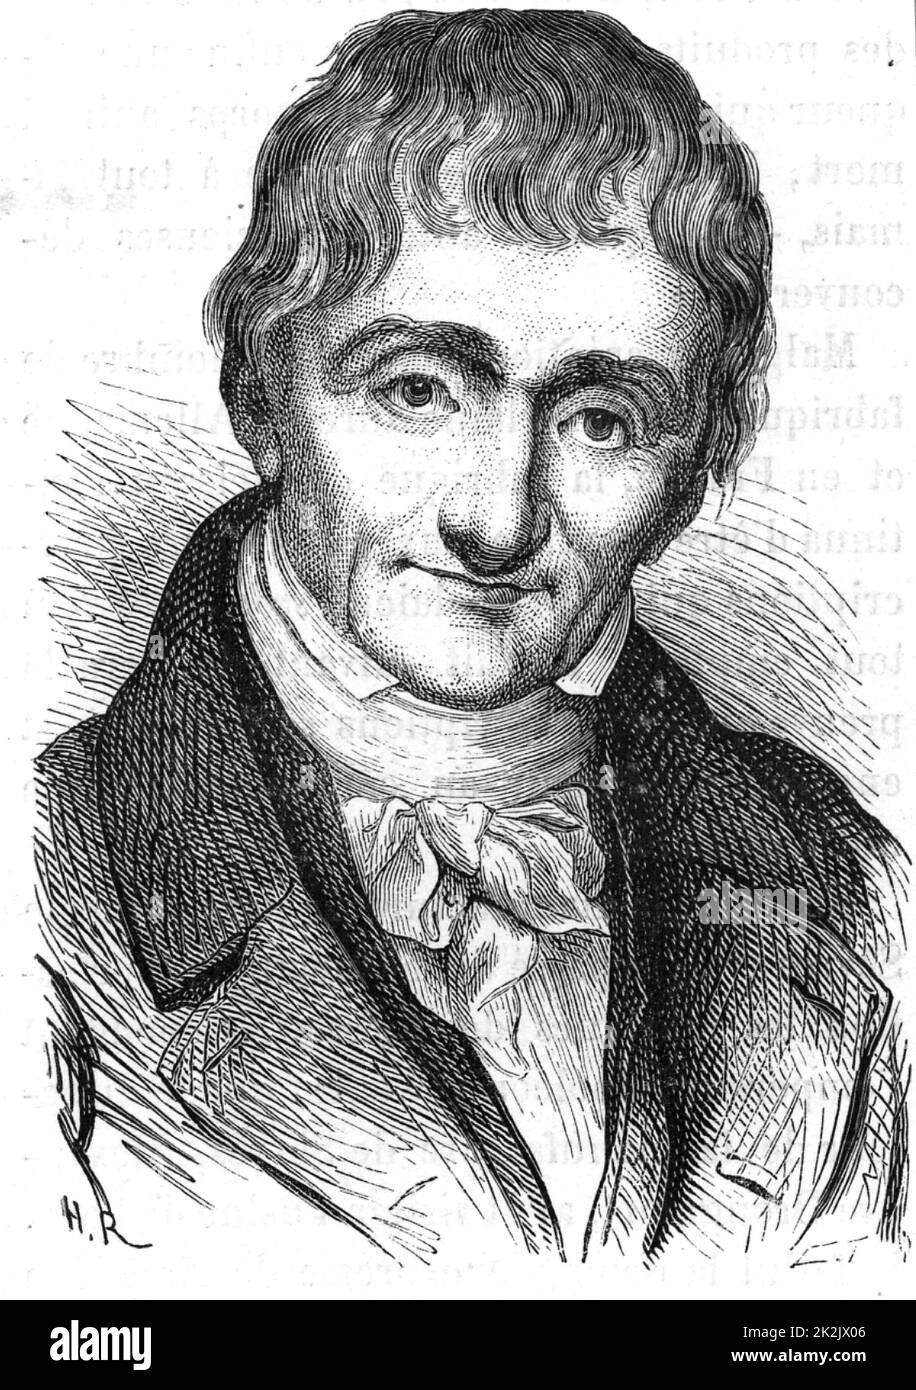 Alexandre Brongniart (1770-1847) French geologist and mineralogist. He introduced term Jurassic for Cotswold clays and limestones. Director of Sevres porcelain factory 1800-1847. Engraving from 'Les Merveilles de l'Industrie' by Louis Figuier (Paris, c1870). Stock Photo